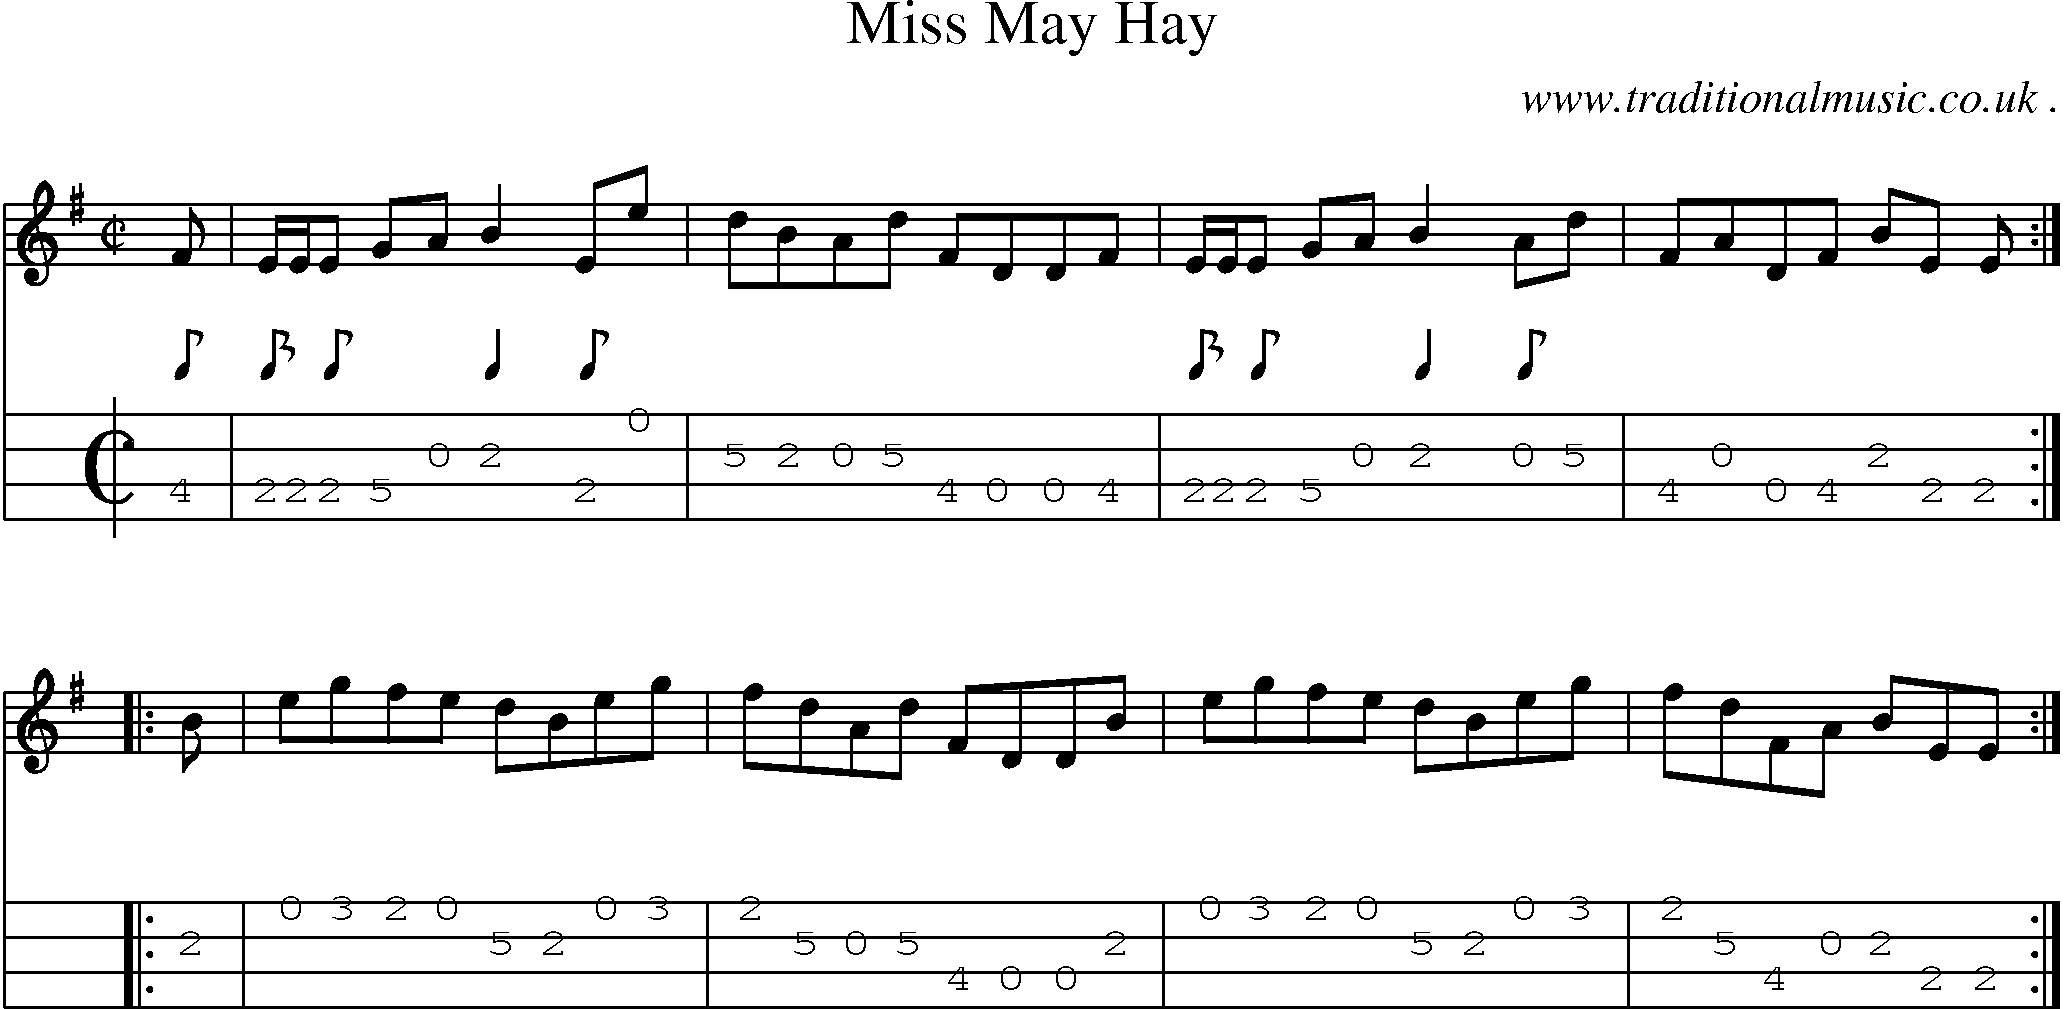 Sheet-music  score, Chords and Mandolin Tabs for Miss May Hay